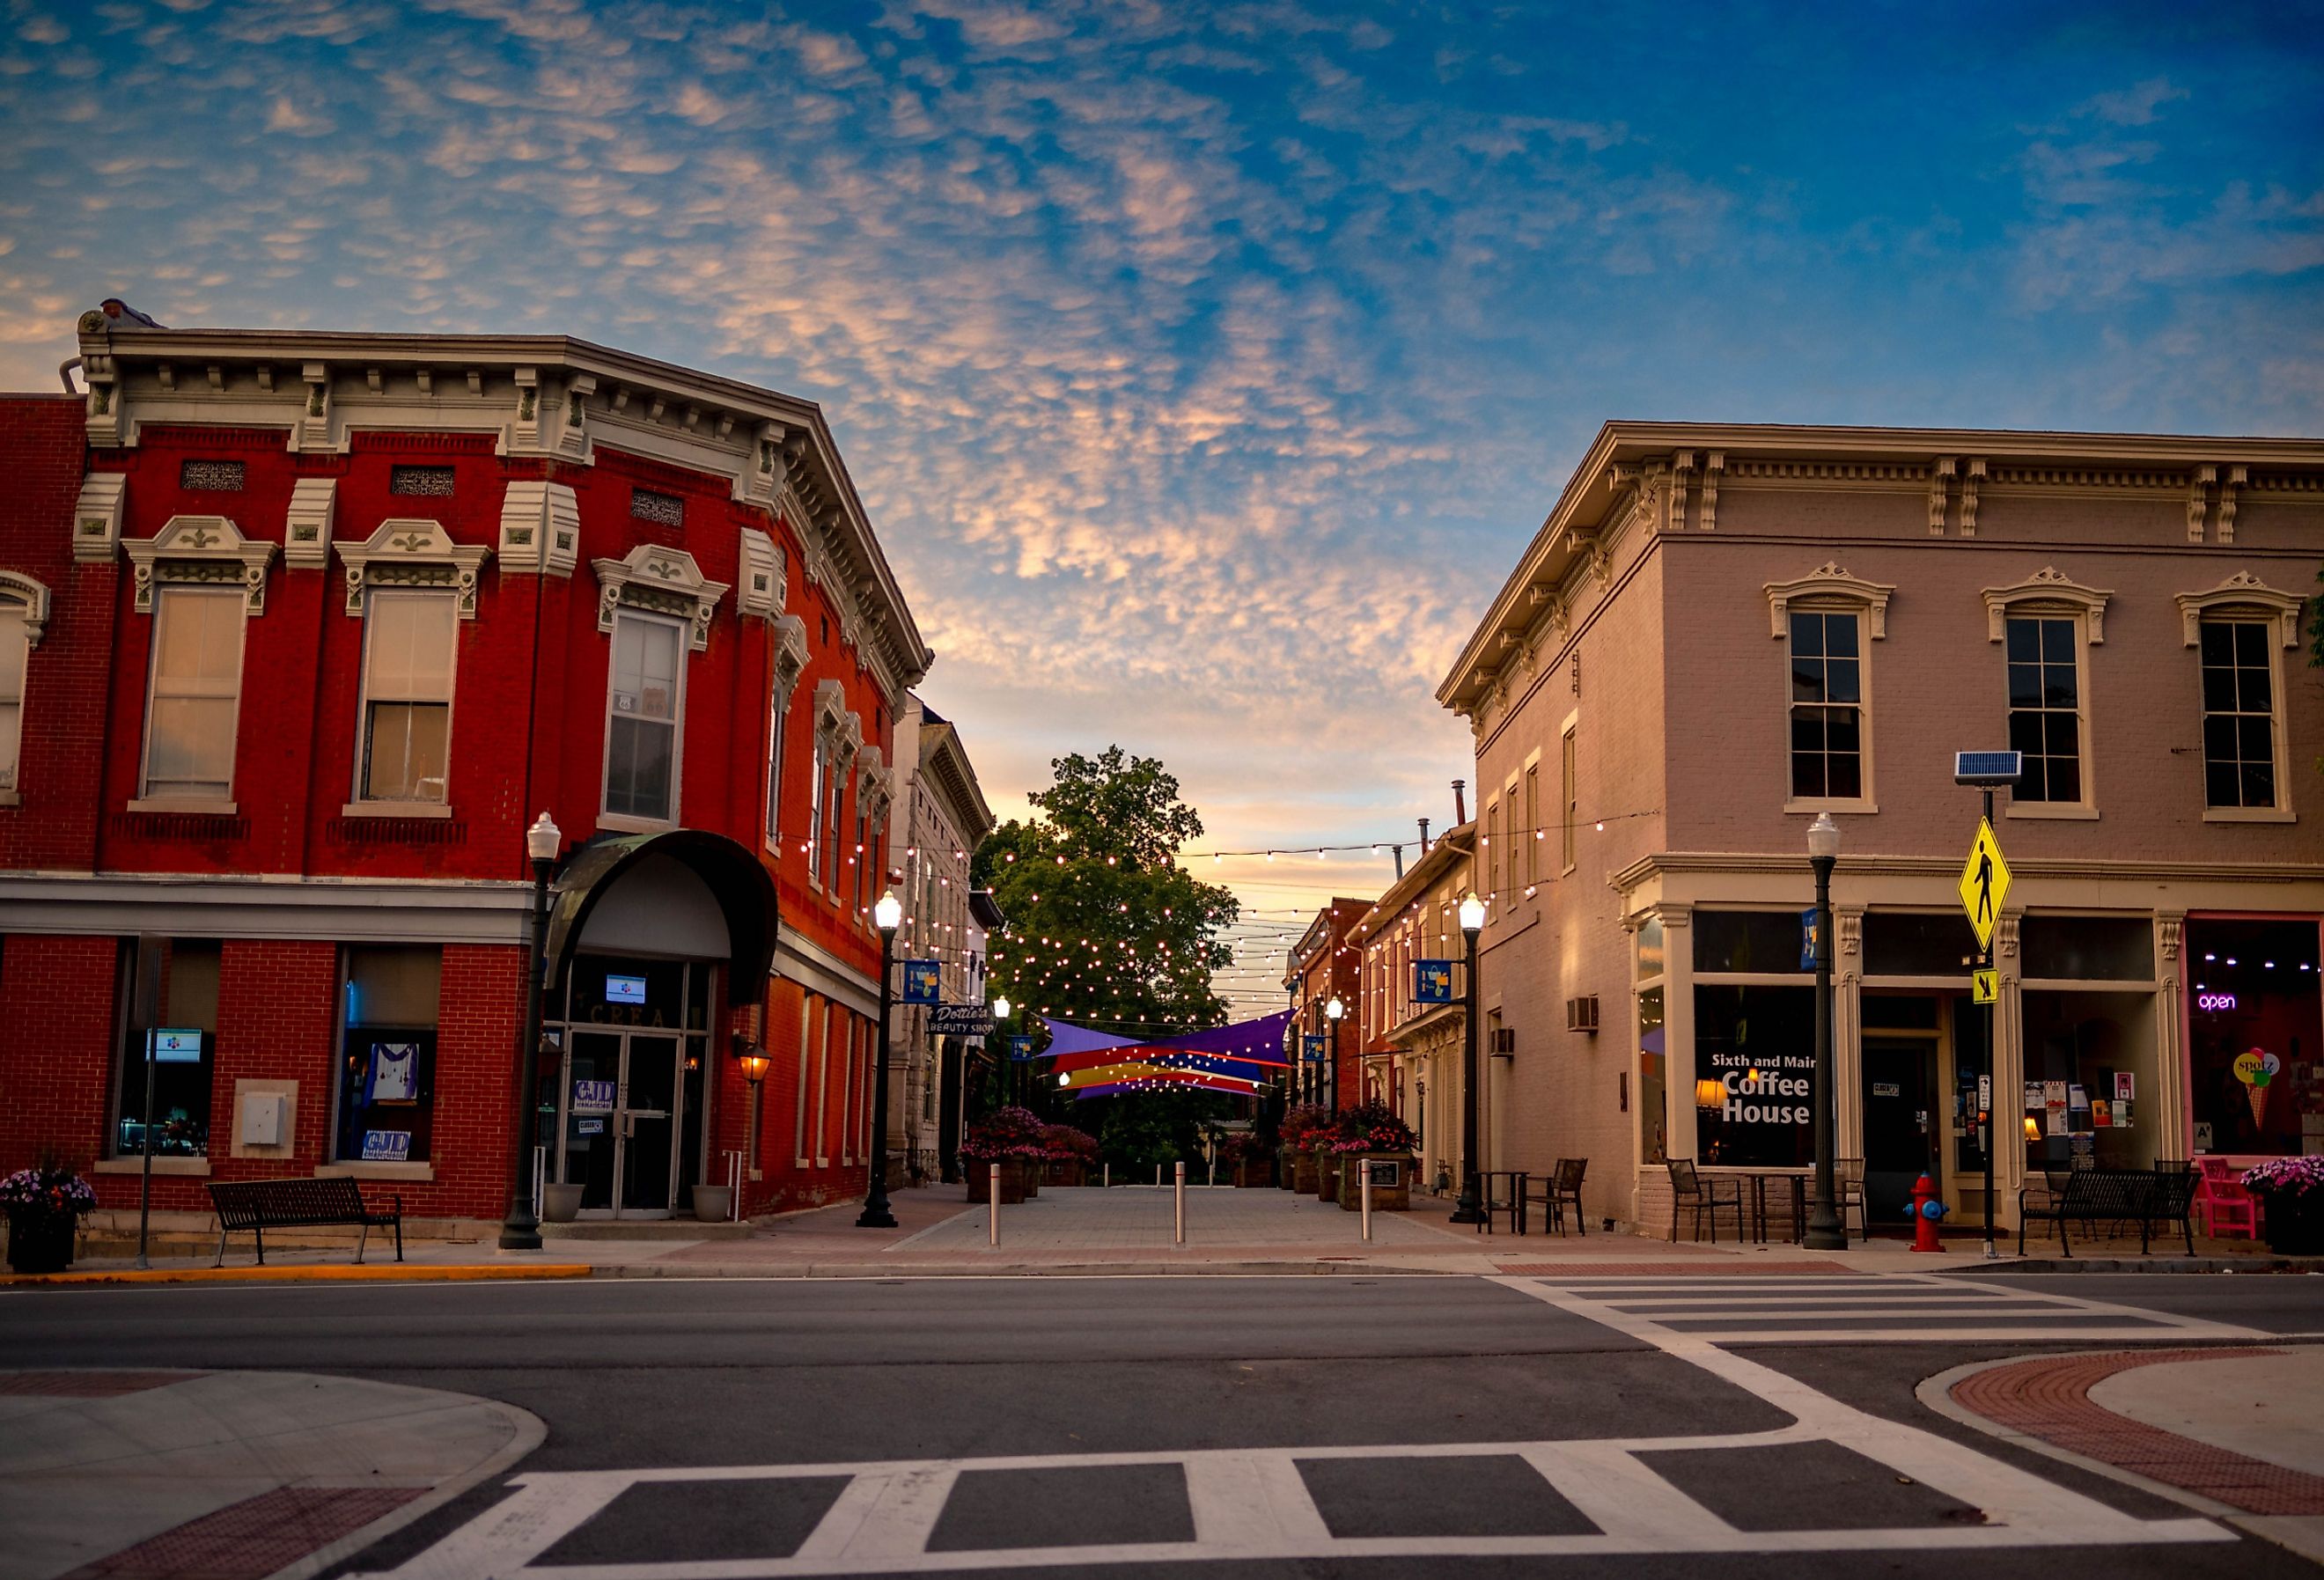 Downtown Shelbyville, Kentucky, Sixth Street is in the heart of the Historic District. Image credit Blue Meta via Shutterstock